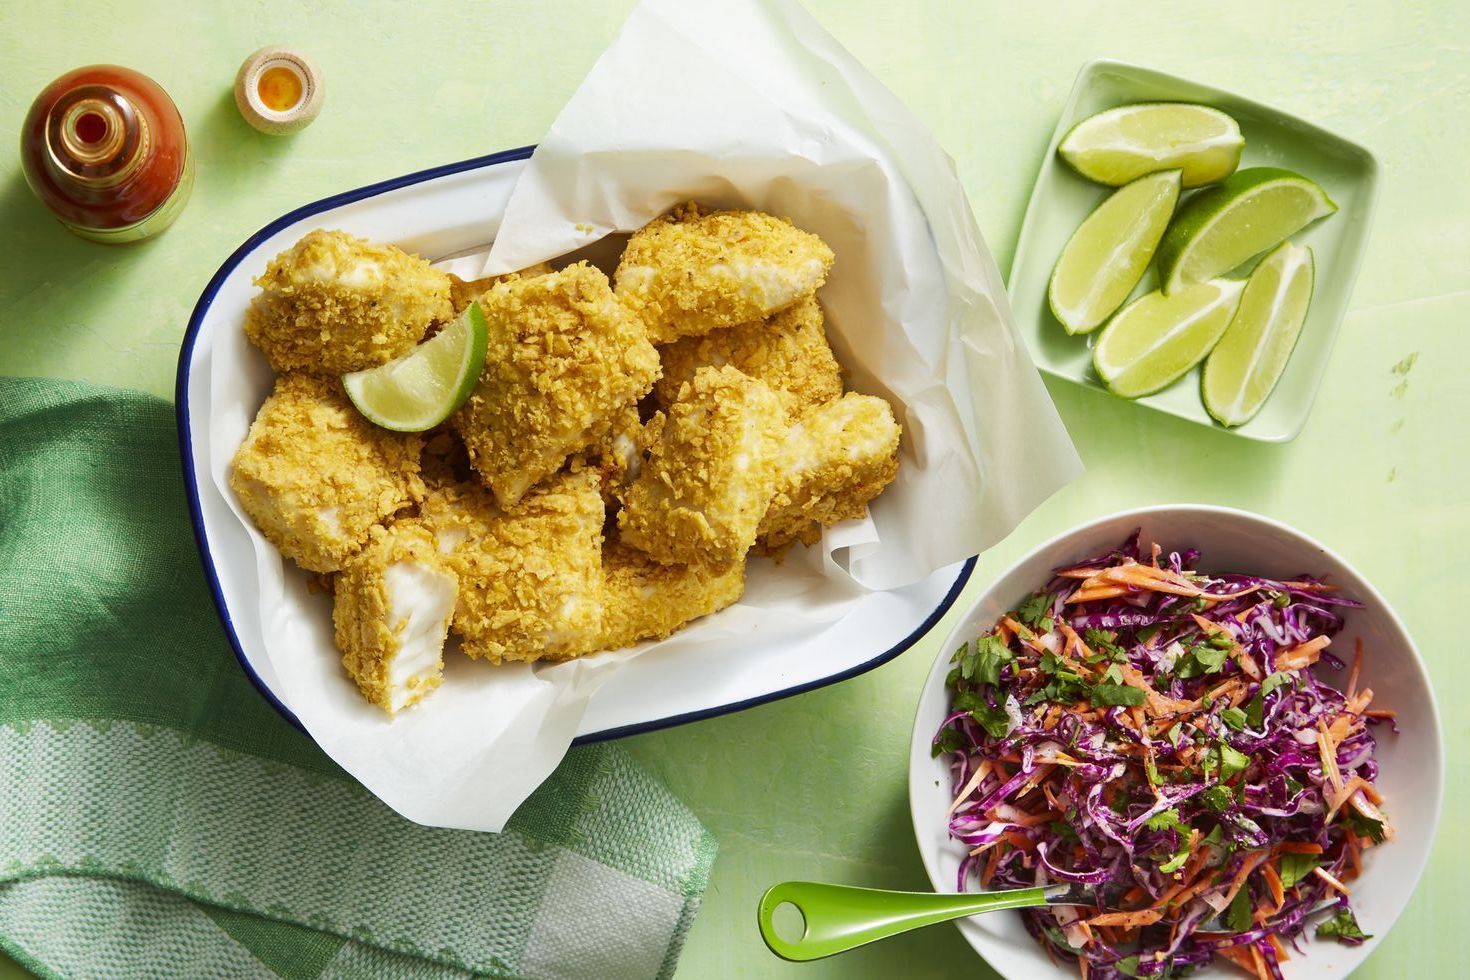 How To Make Crunchy Tortilla Fish Sticks with Purple Cabbage Slaw